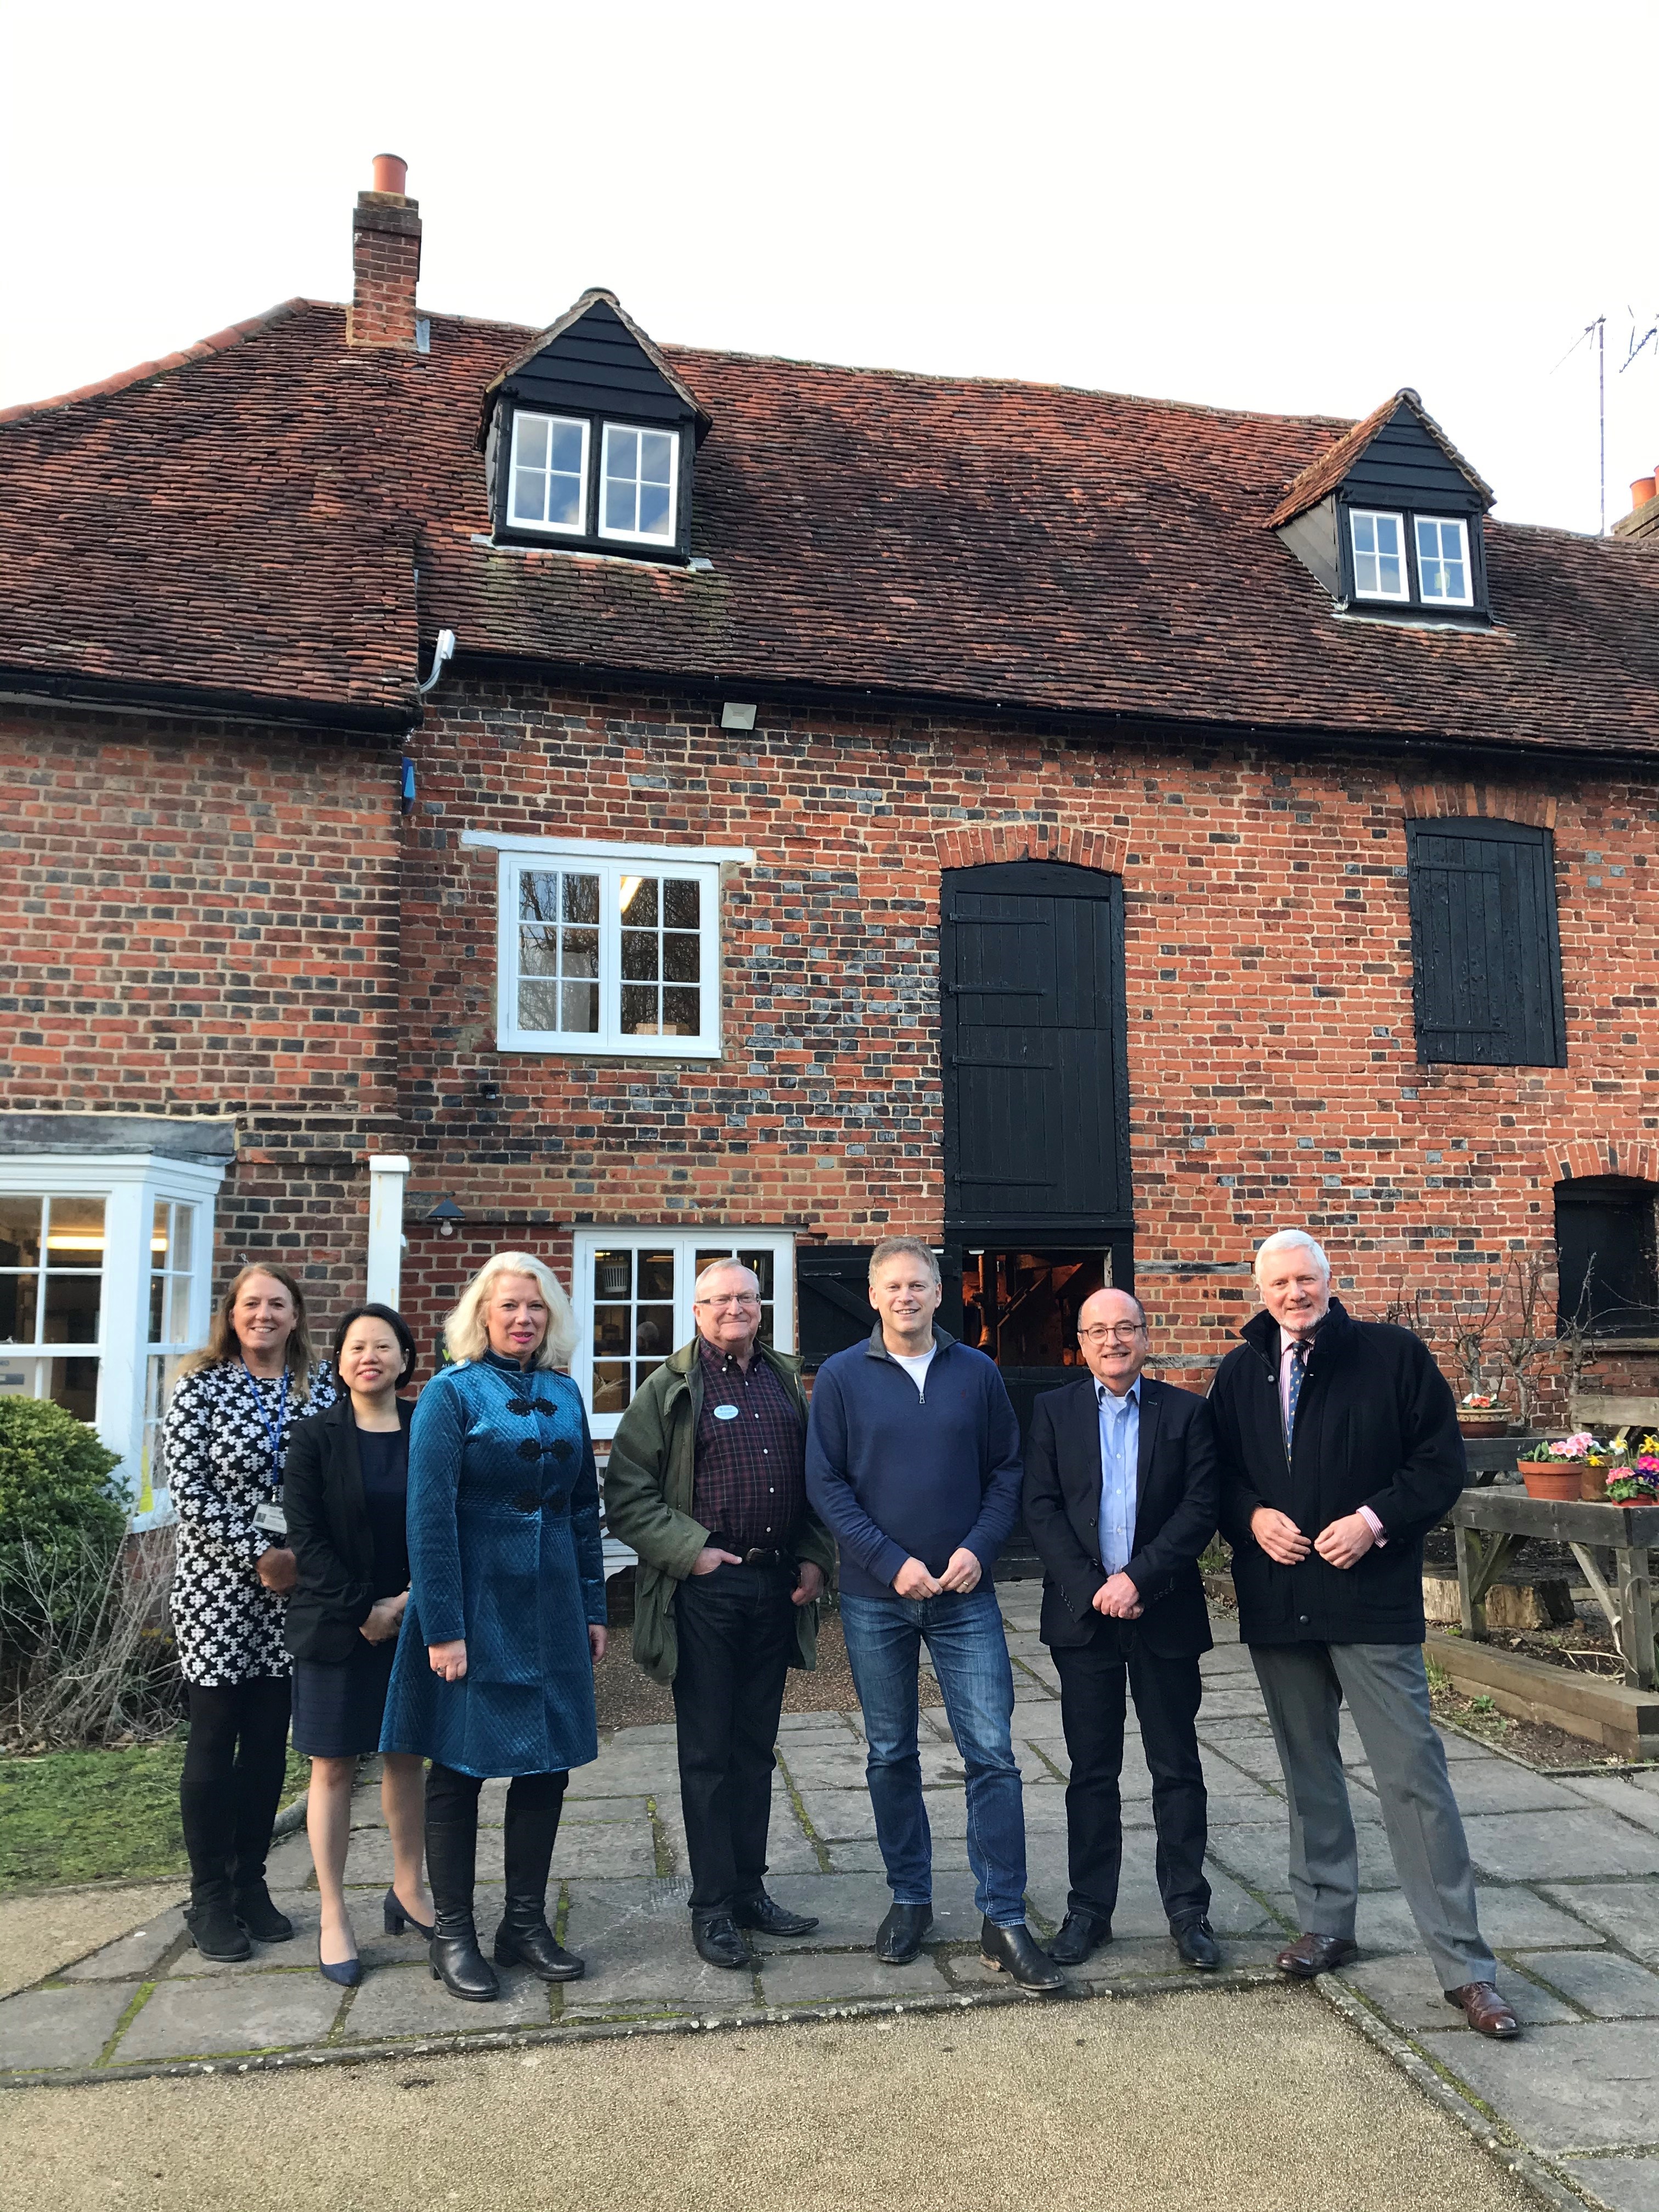 Councillors, MP Grant Shapps, and Chief executive of Welwyn Hatfield Borough Council stand outside of Mill Green Museum and watermill